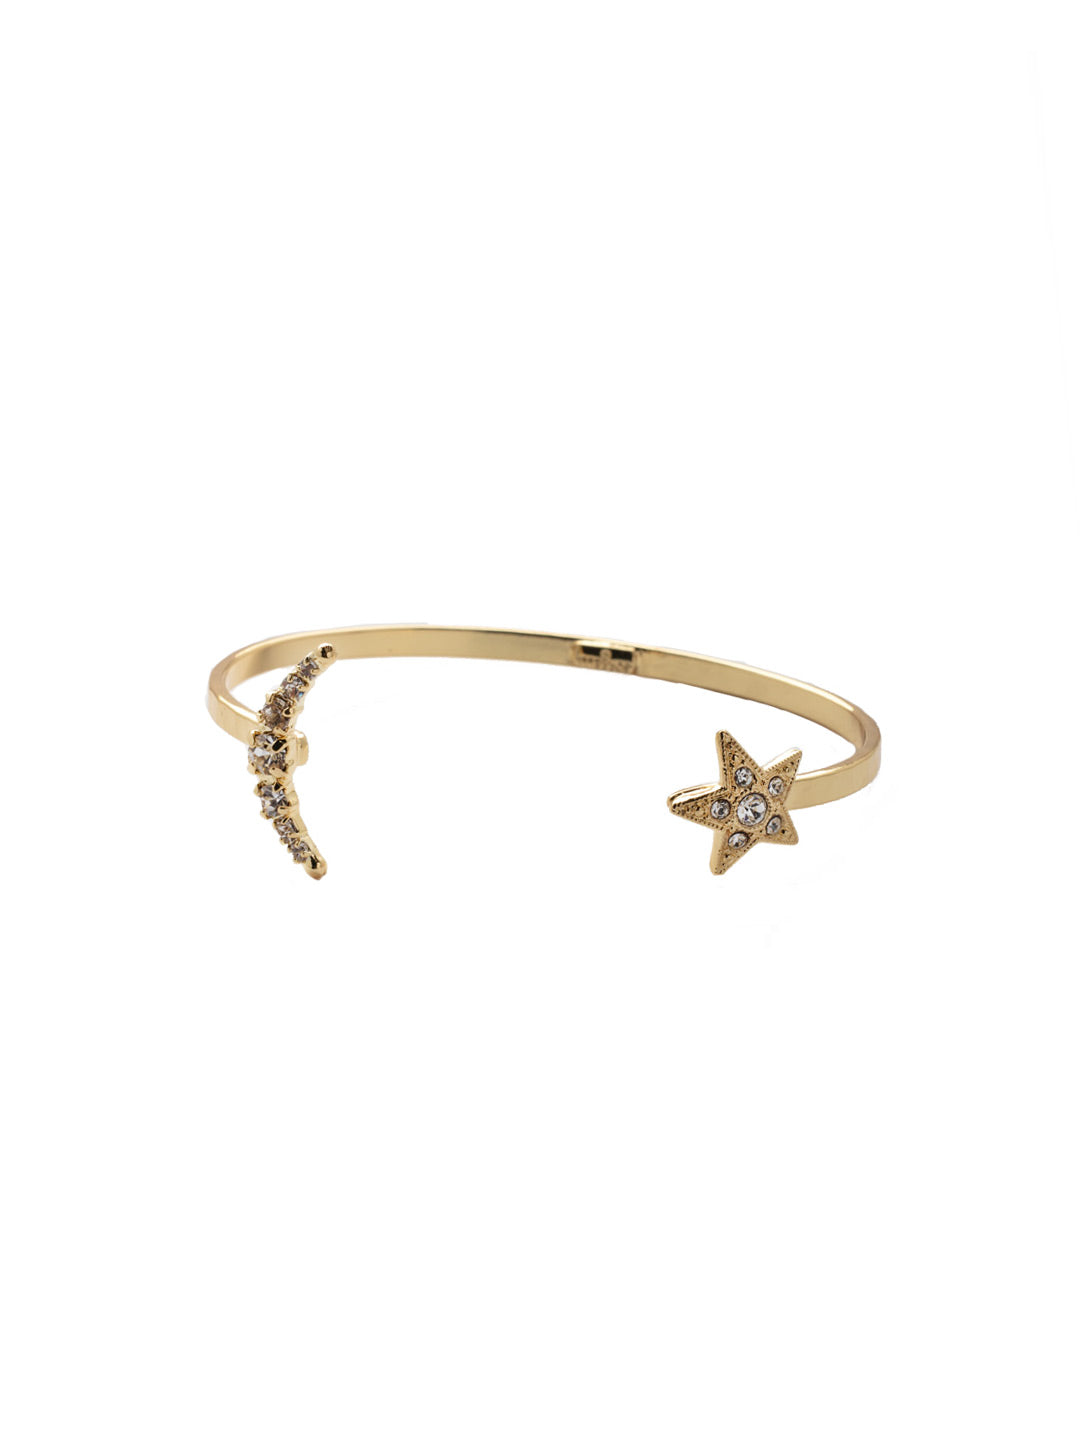 Nebula Cuff Bracelet - 4BEZ20BGCRY - <p>The Nebula Cuff Bracelet is an out-of-this-world celestial wardrobe staple; an adjustable thin cuff lays base to a crystal studded one half crescent moon and one star on opposite ends of the open cuff. From Sorrelli's Crystal collection in our Bright Gold-tone finish.</p>